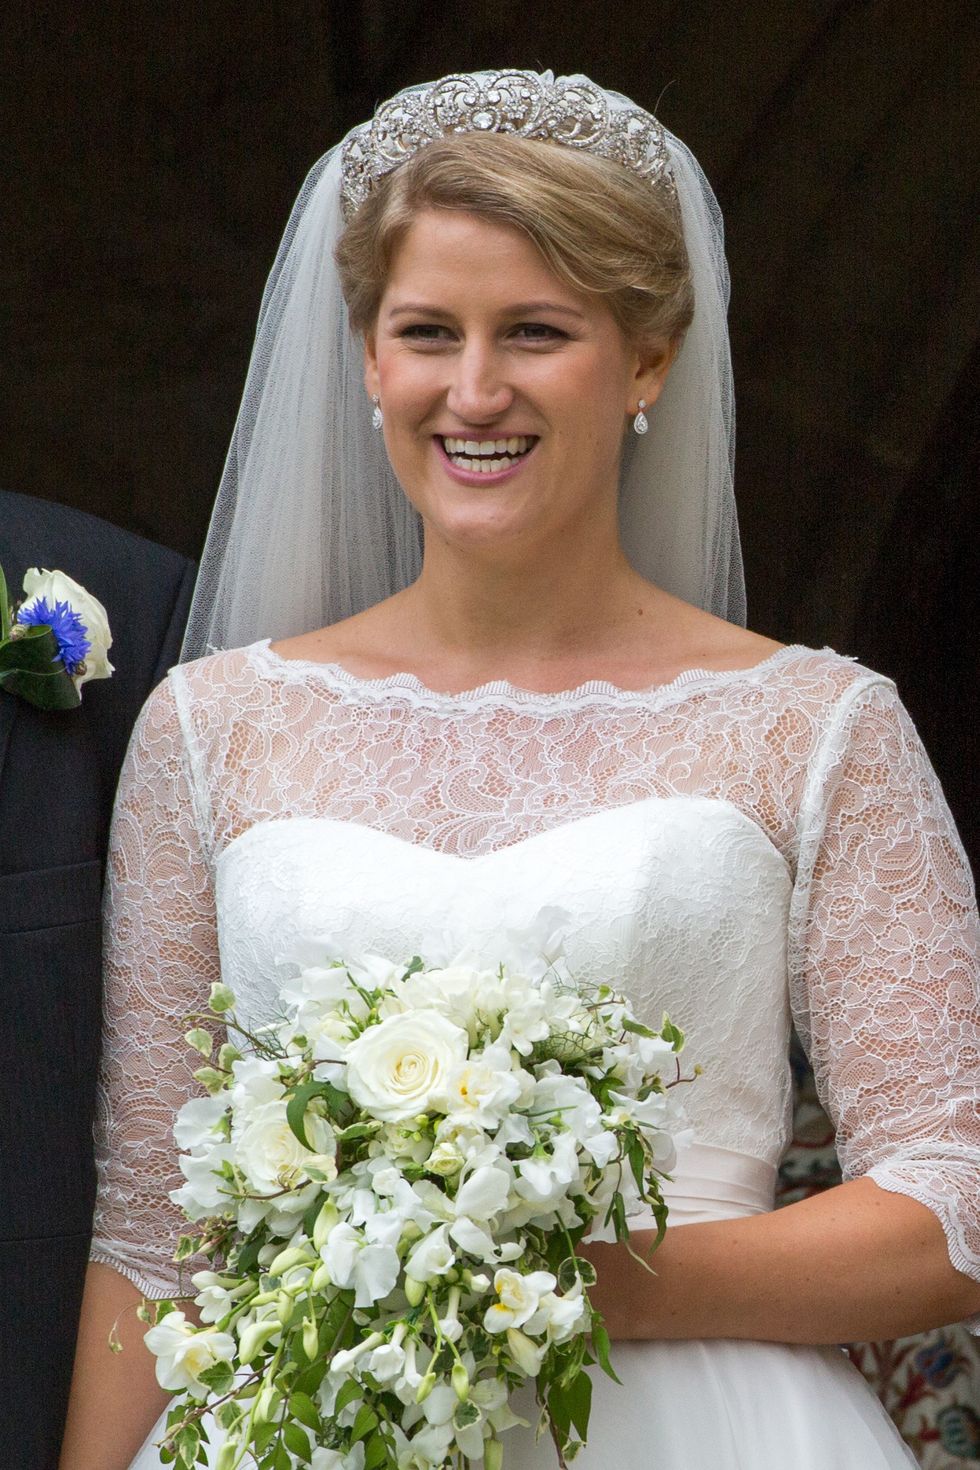 Princess Diana's niece's looked the spitting image of Diana at her wedding over the weekend